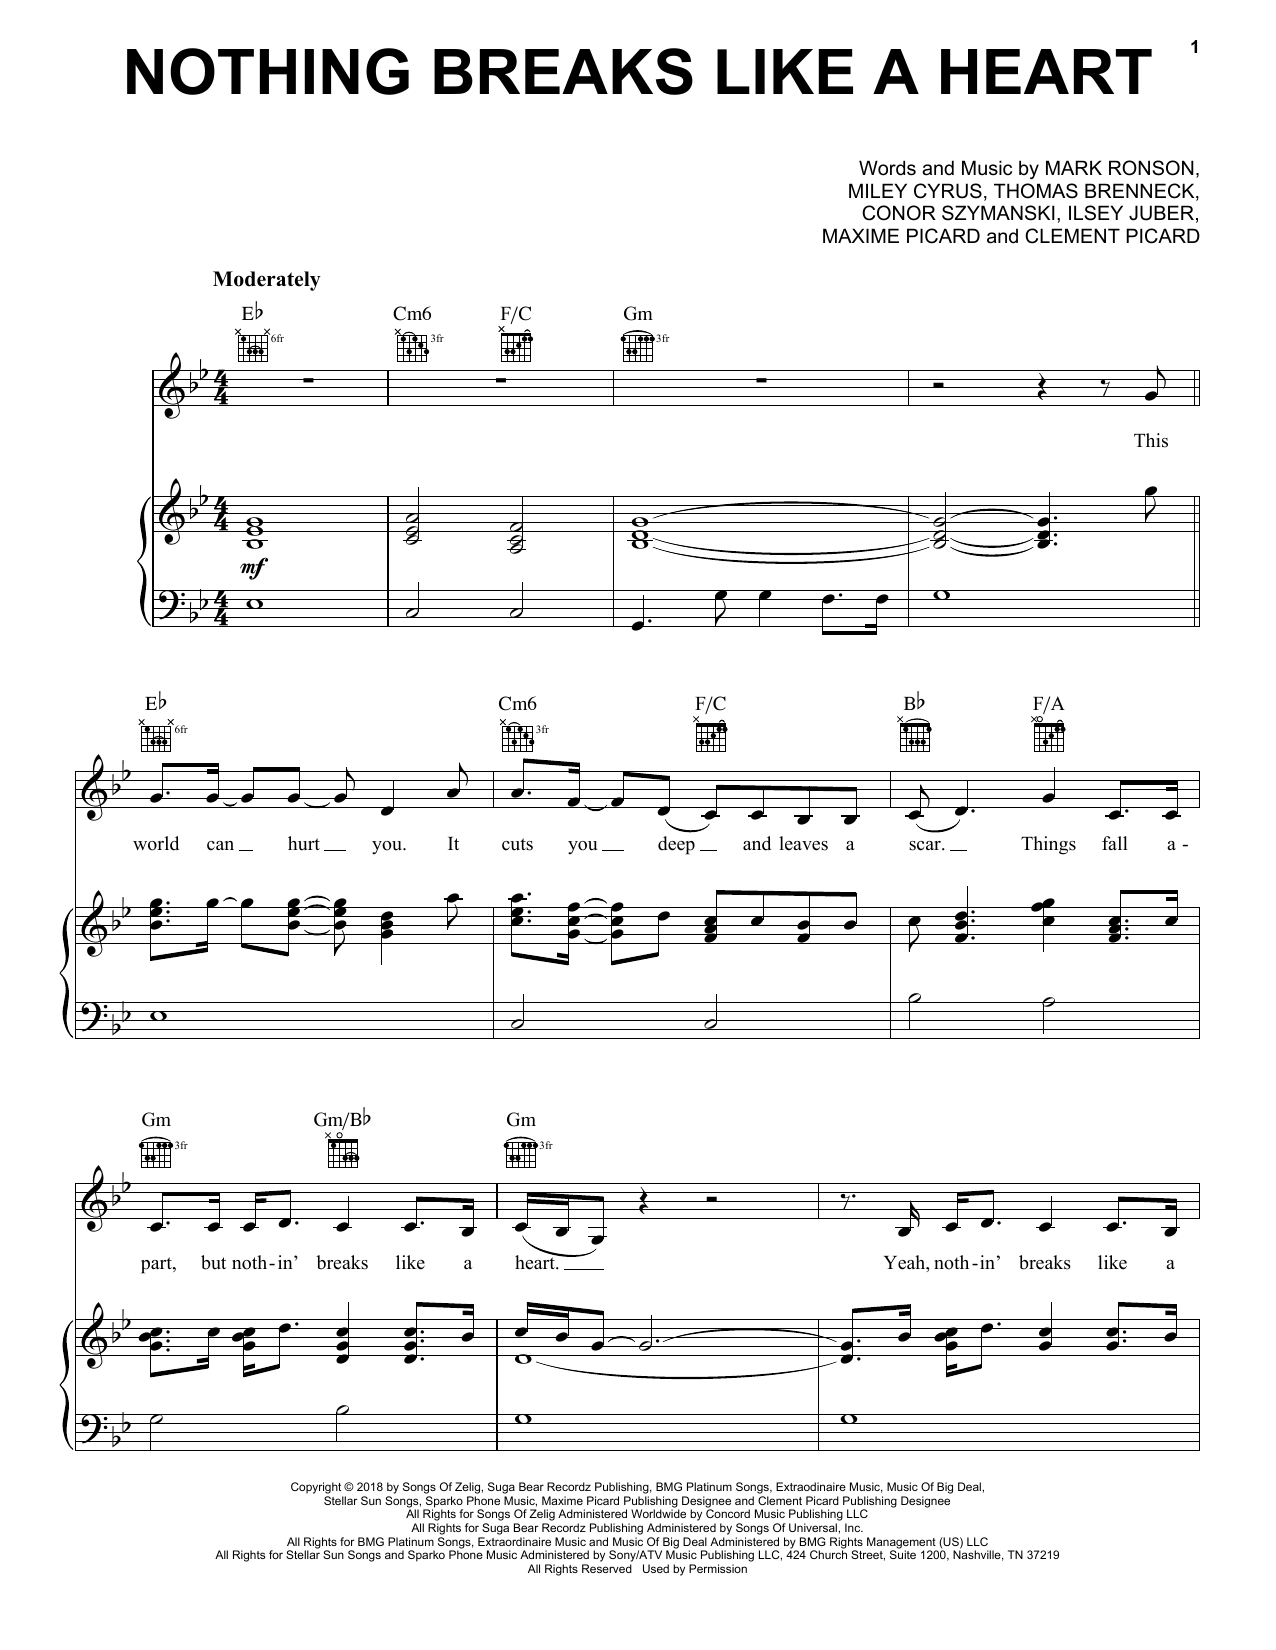 Download Mark Ronson Nothing Breaks Like A Heart (feat. Mile Sheet Music